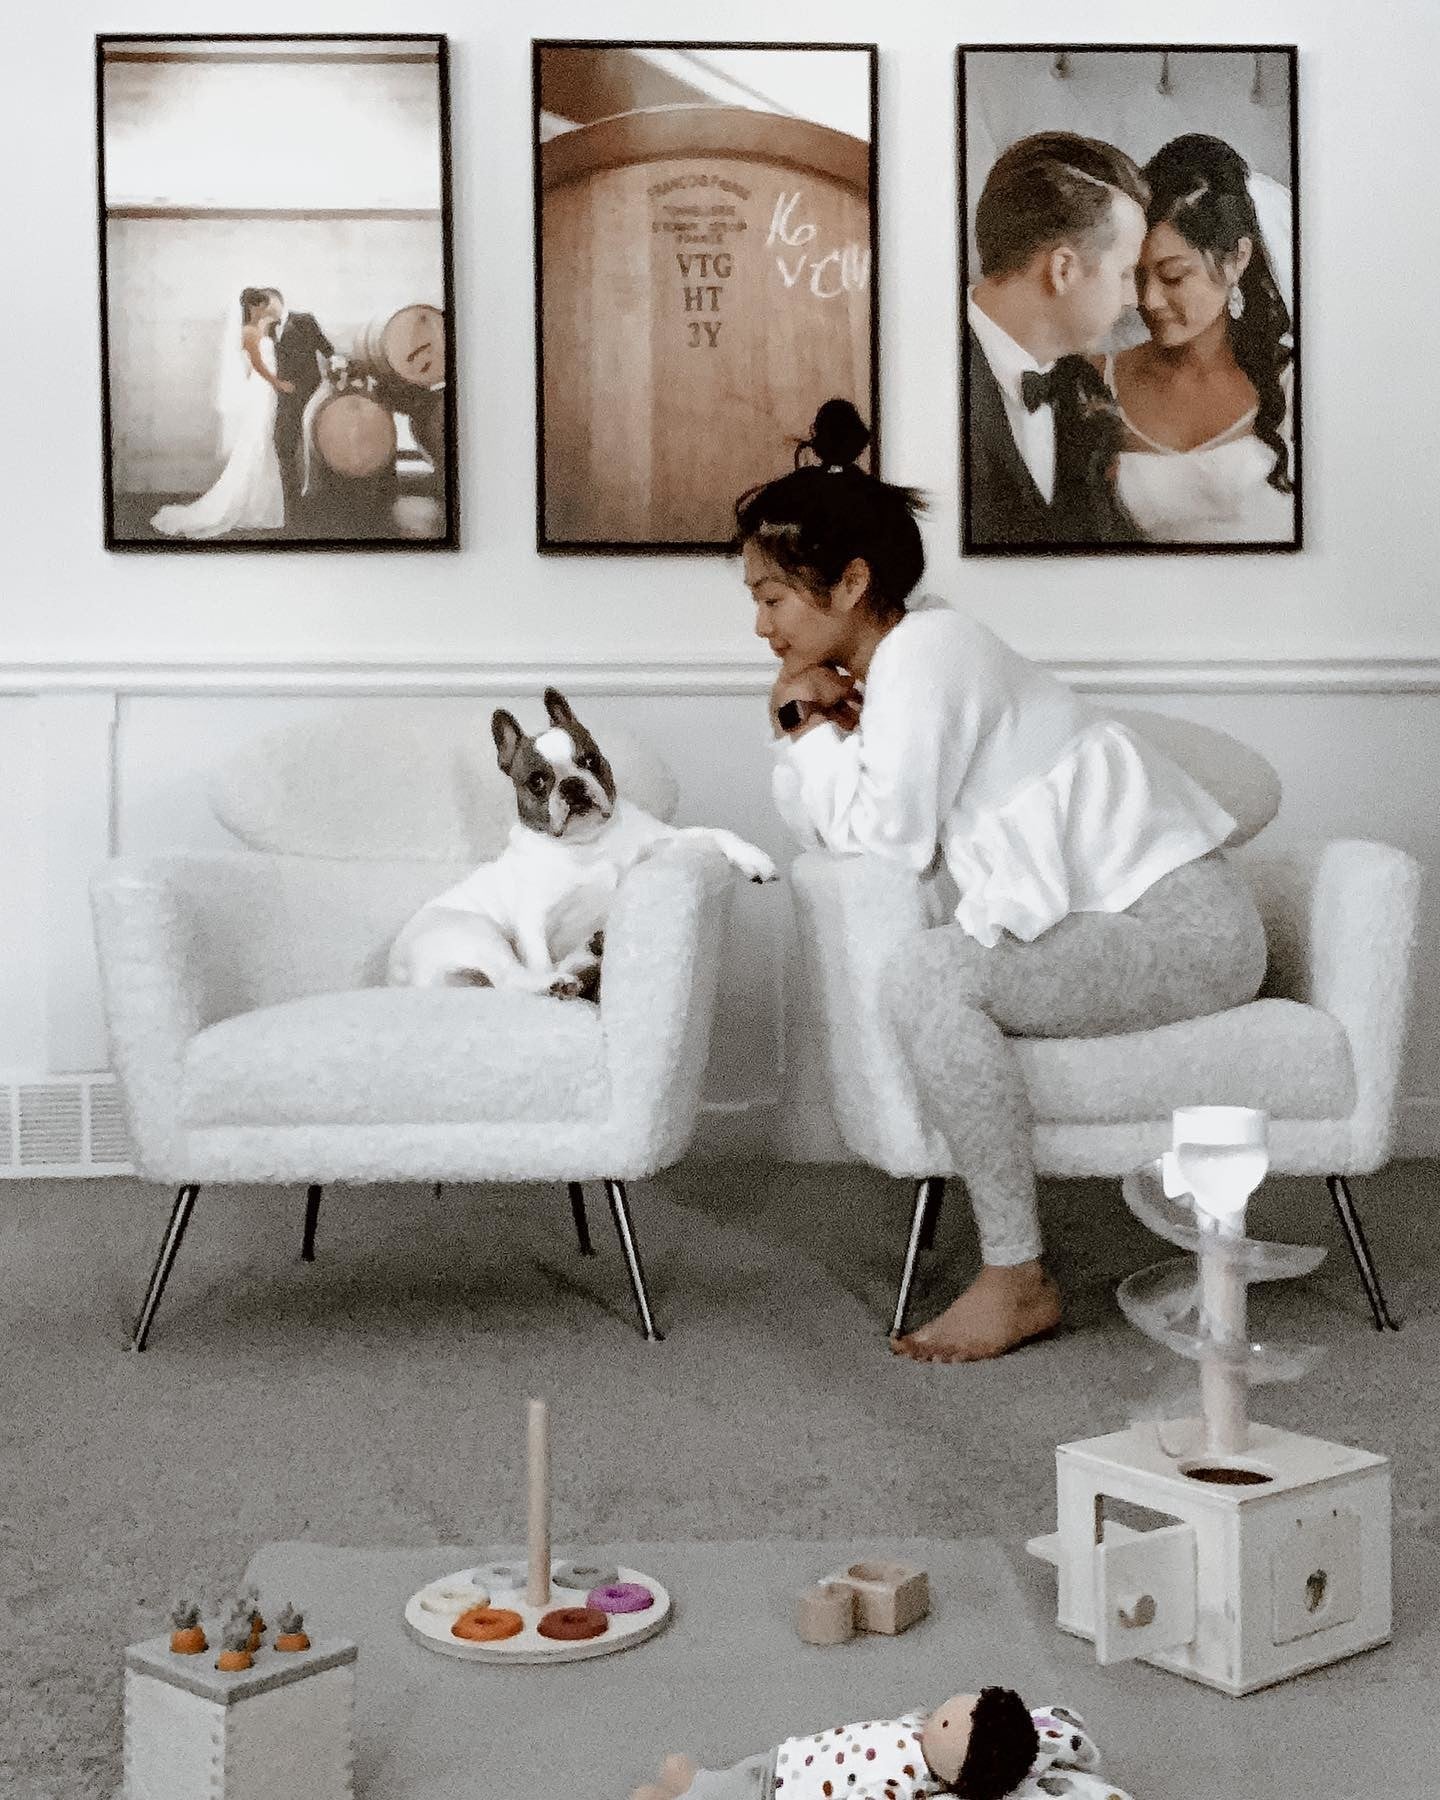 Three Large Canvas Prints Displayed on the Wall with a Person and Dog in the Foreground - Posterjack Customer Photo